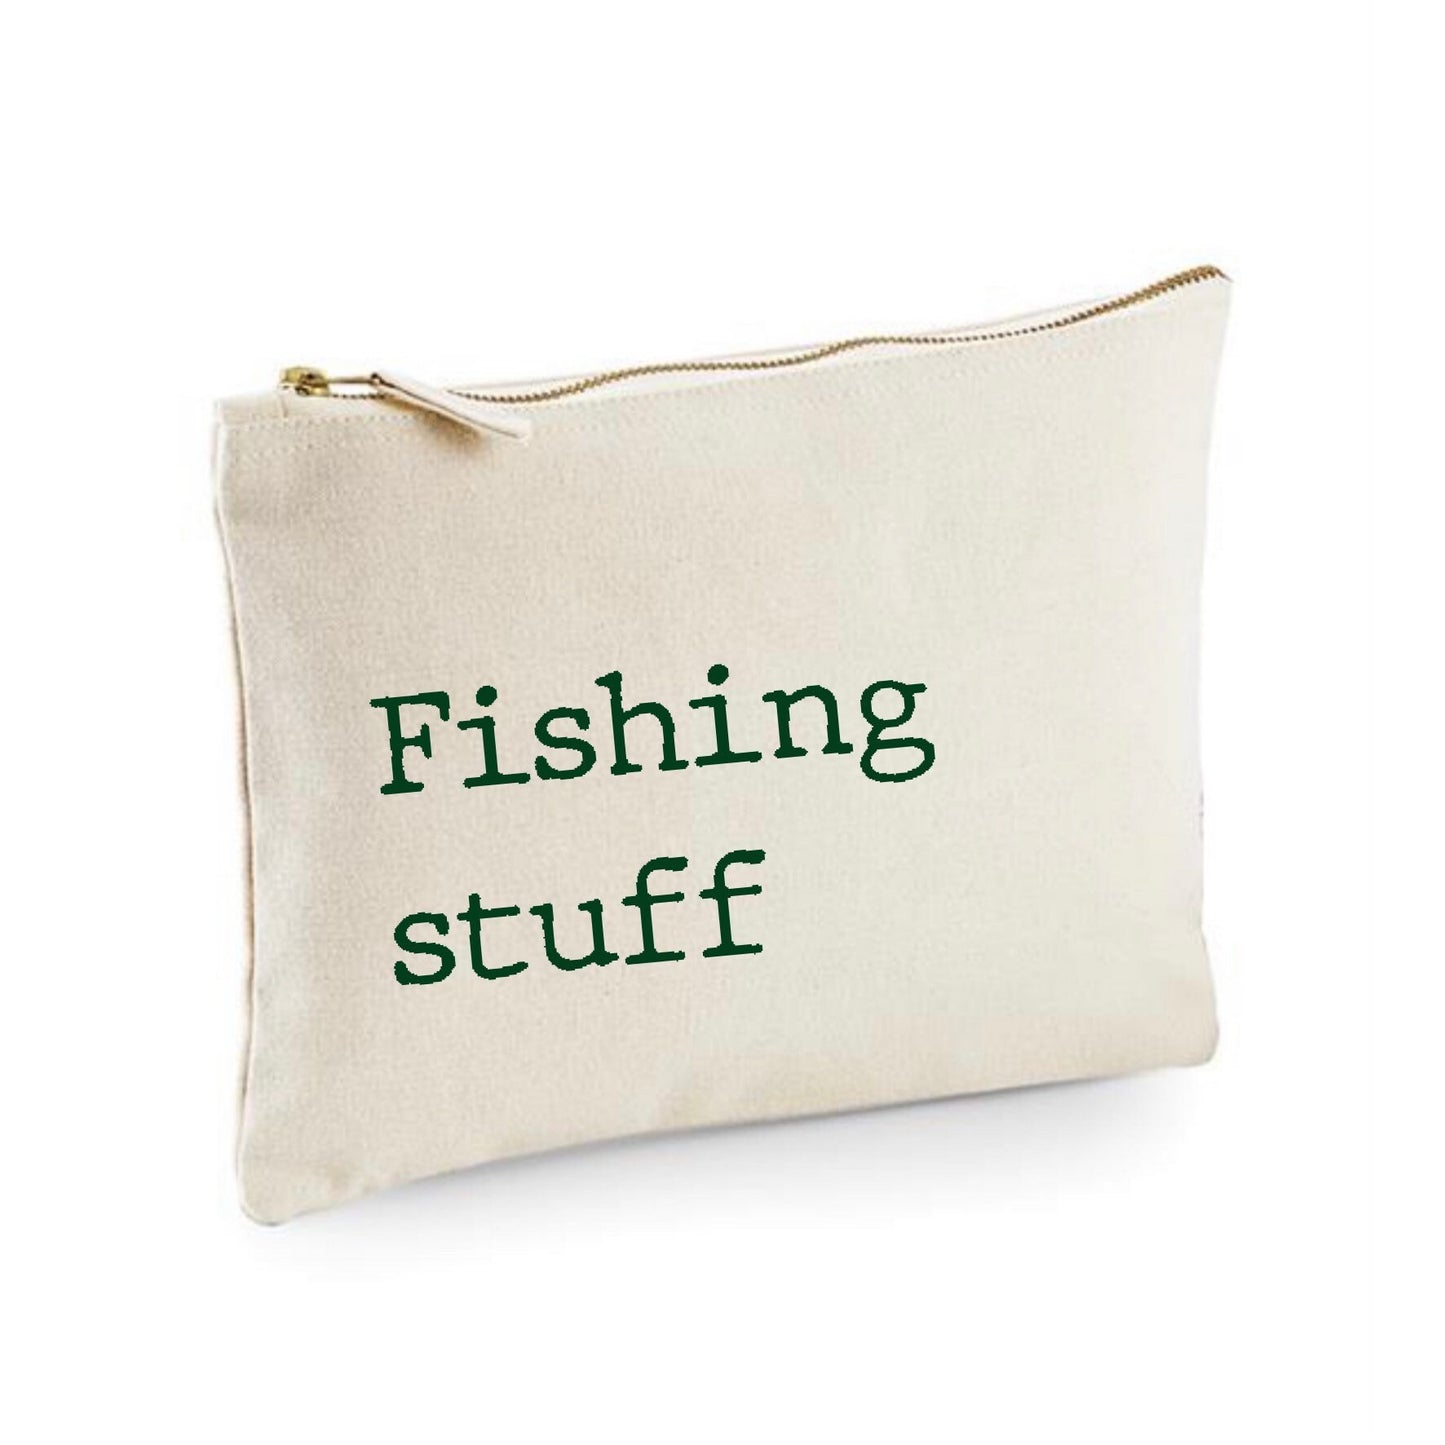 Fishing stuff pouch bag, personalised fishing tackle  pouch for dad and grandad birthday or Father’s Day gift, dads tackle kit